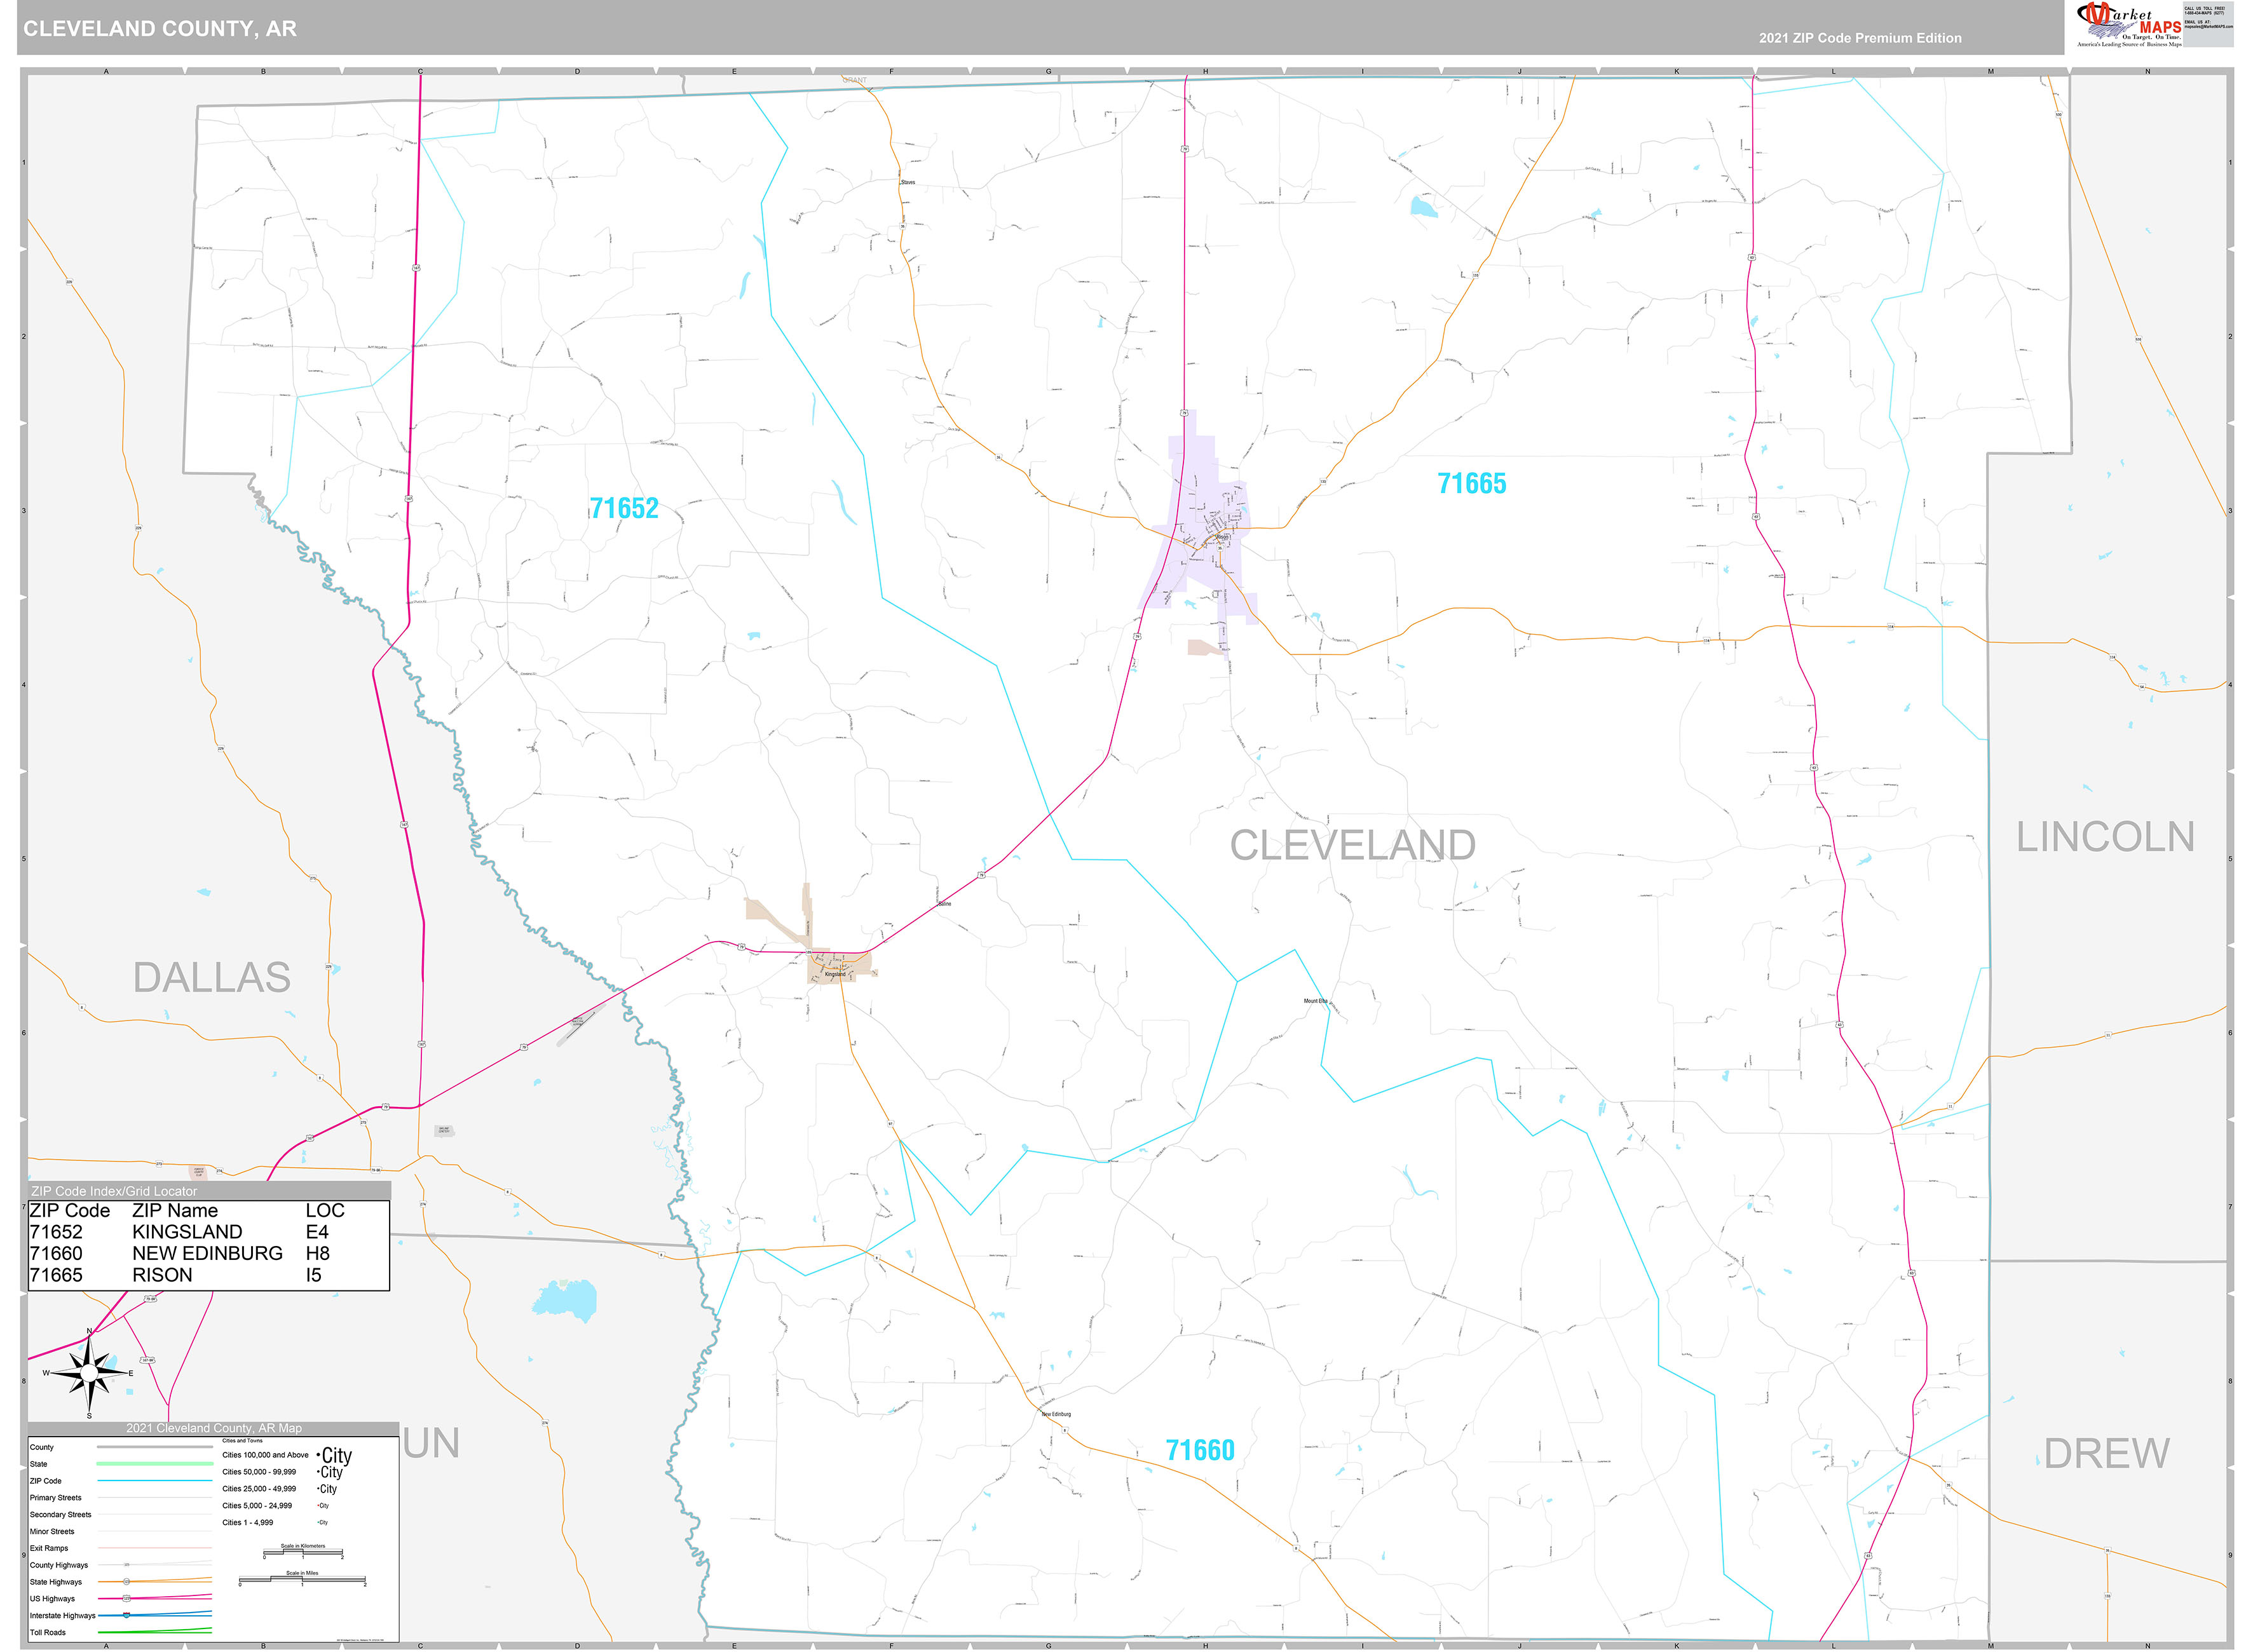 Cleveland County AR Wall Map Premium Style by MarketMAPS